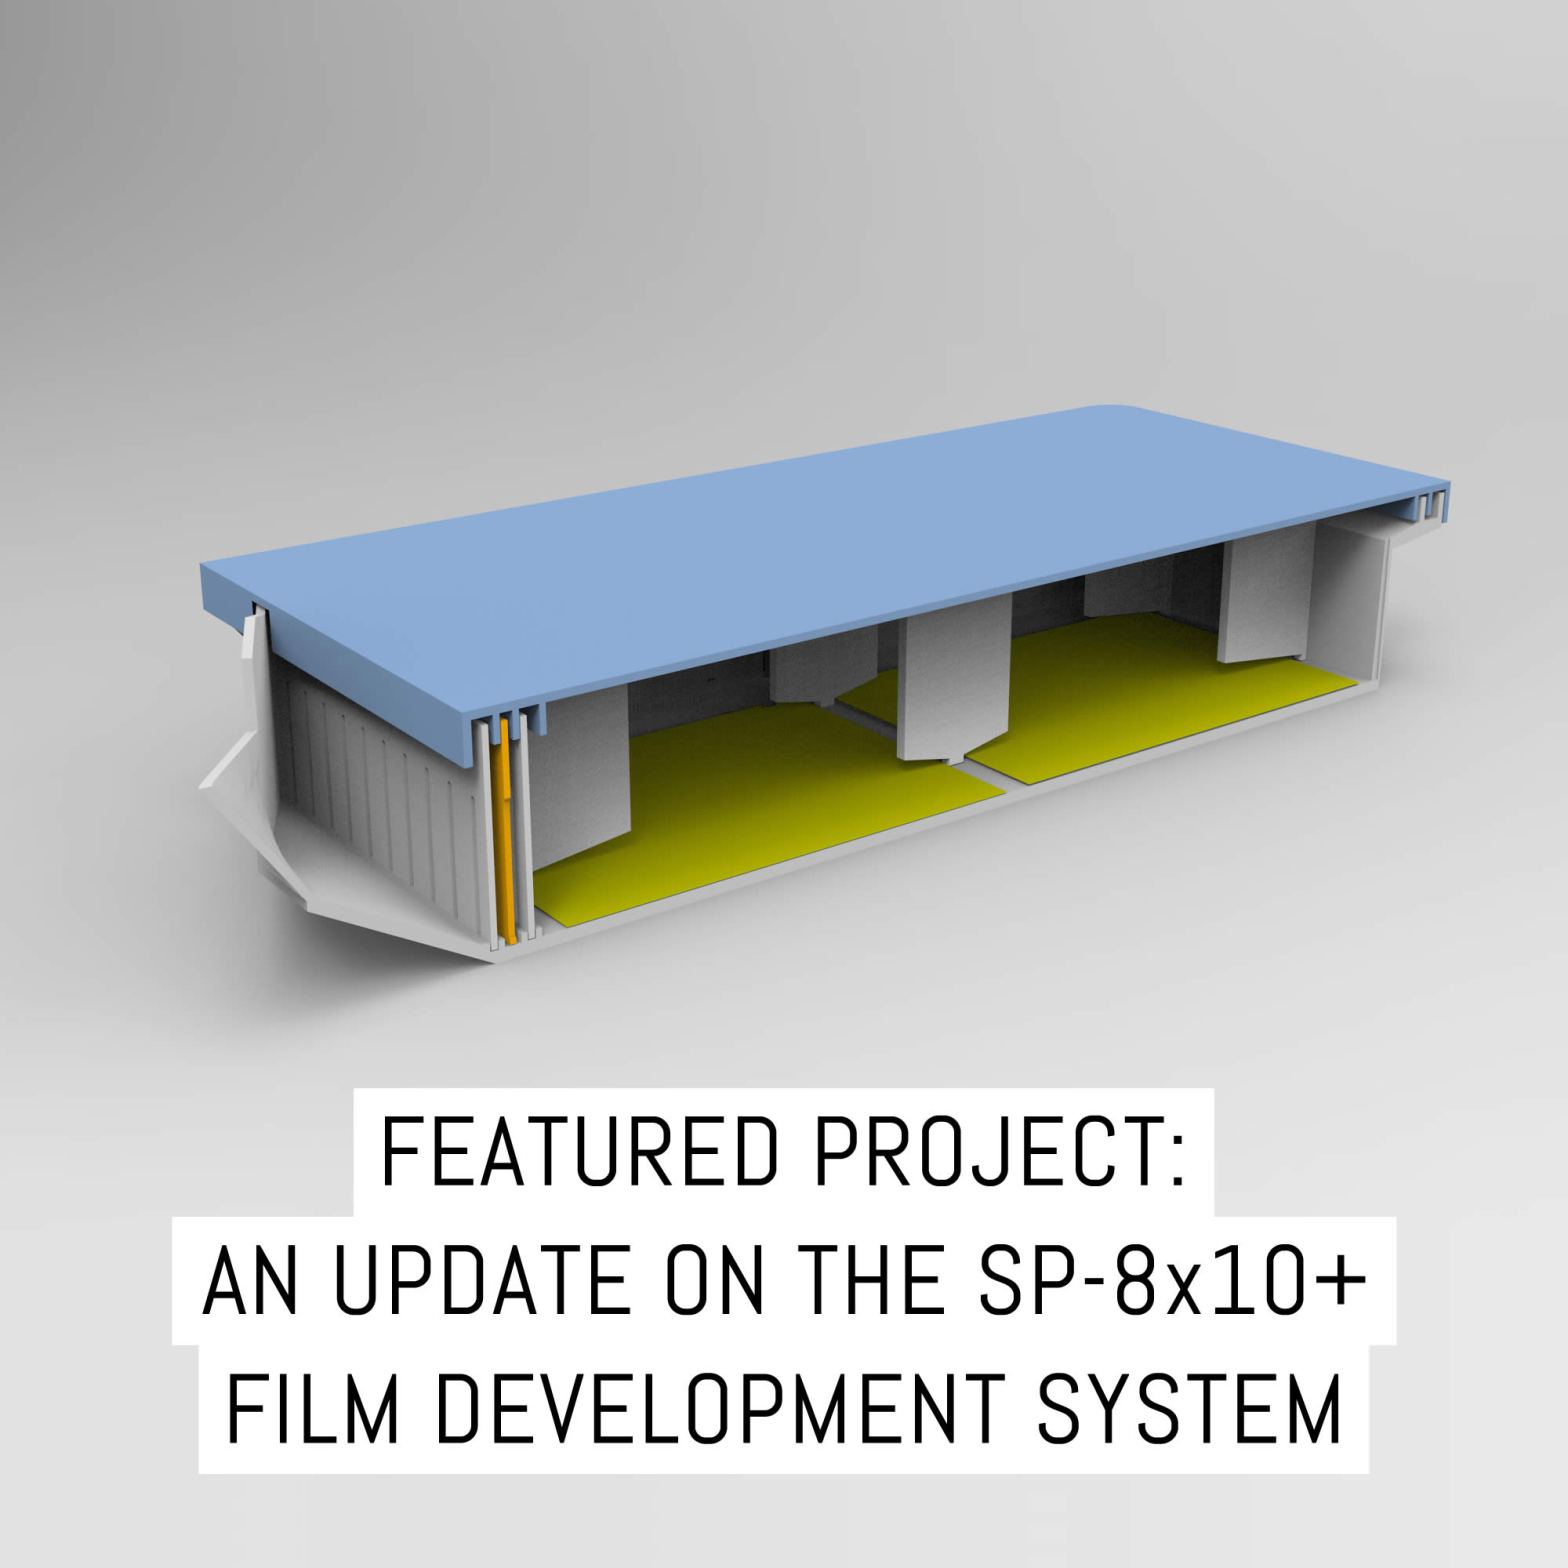 An update on the SP-8×10+ film development system